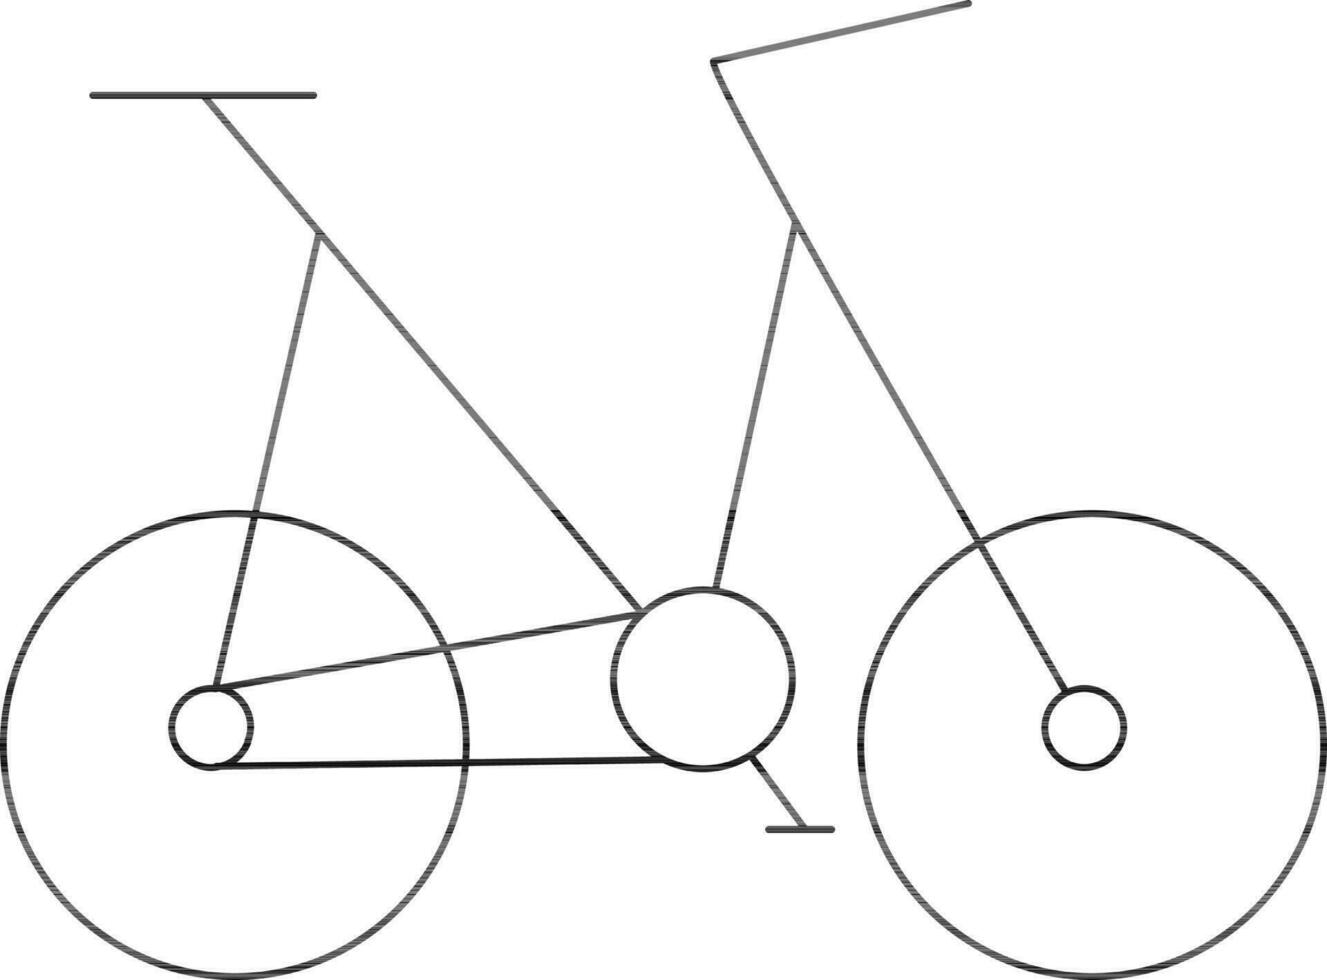 Black Outline Bicycle Icon on White Background. vector